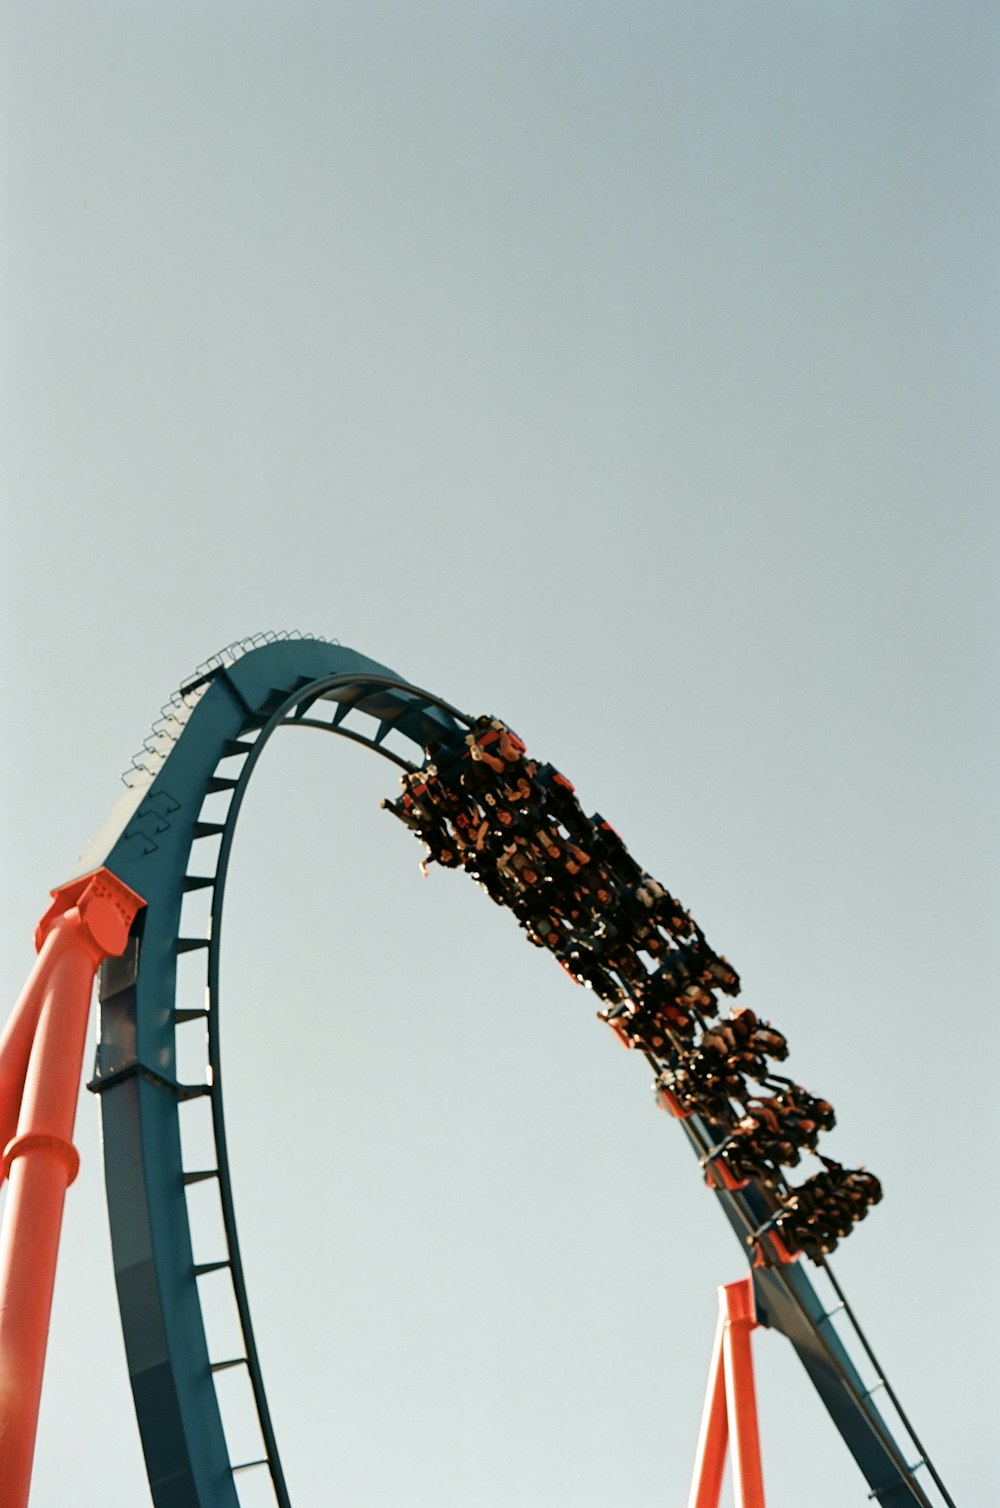 a roller coaster with people riding it